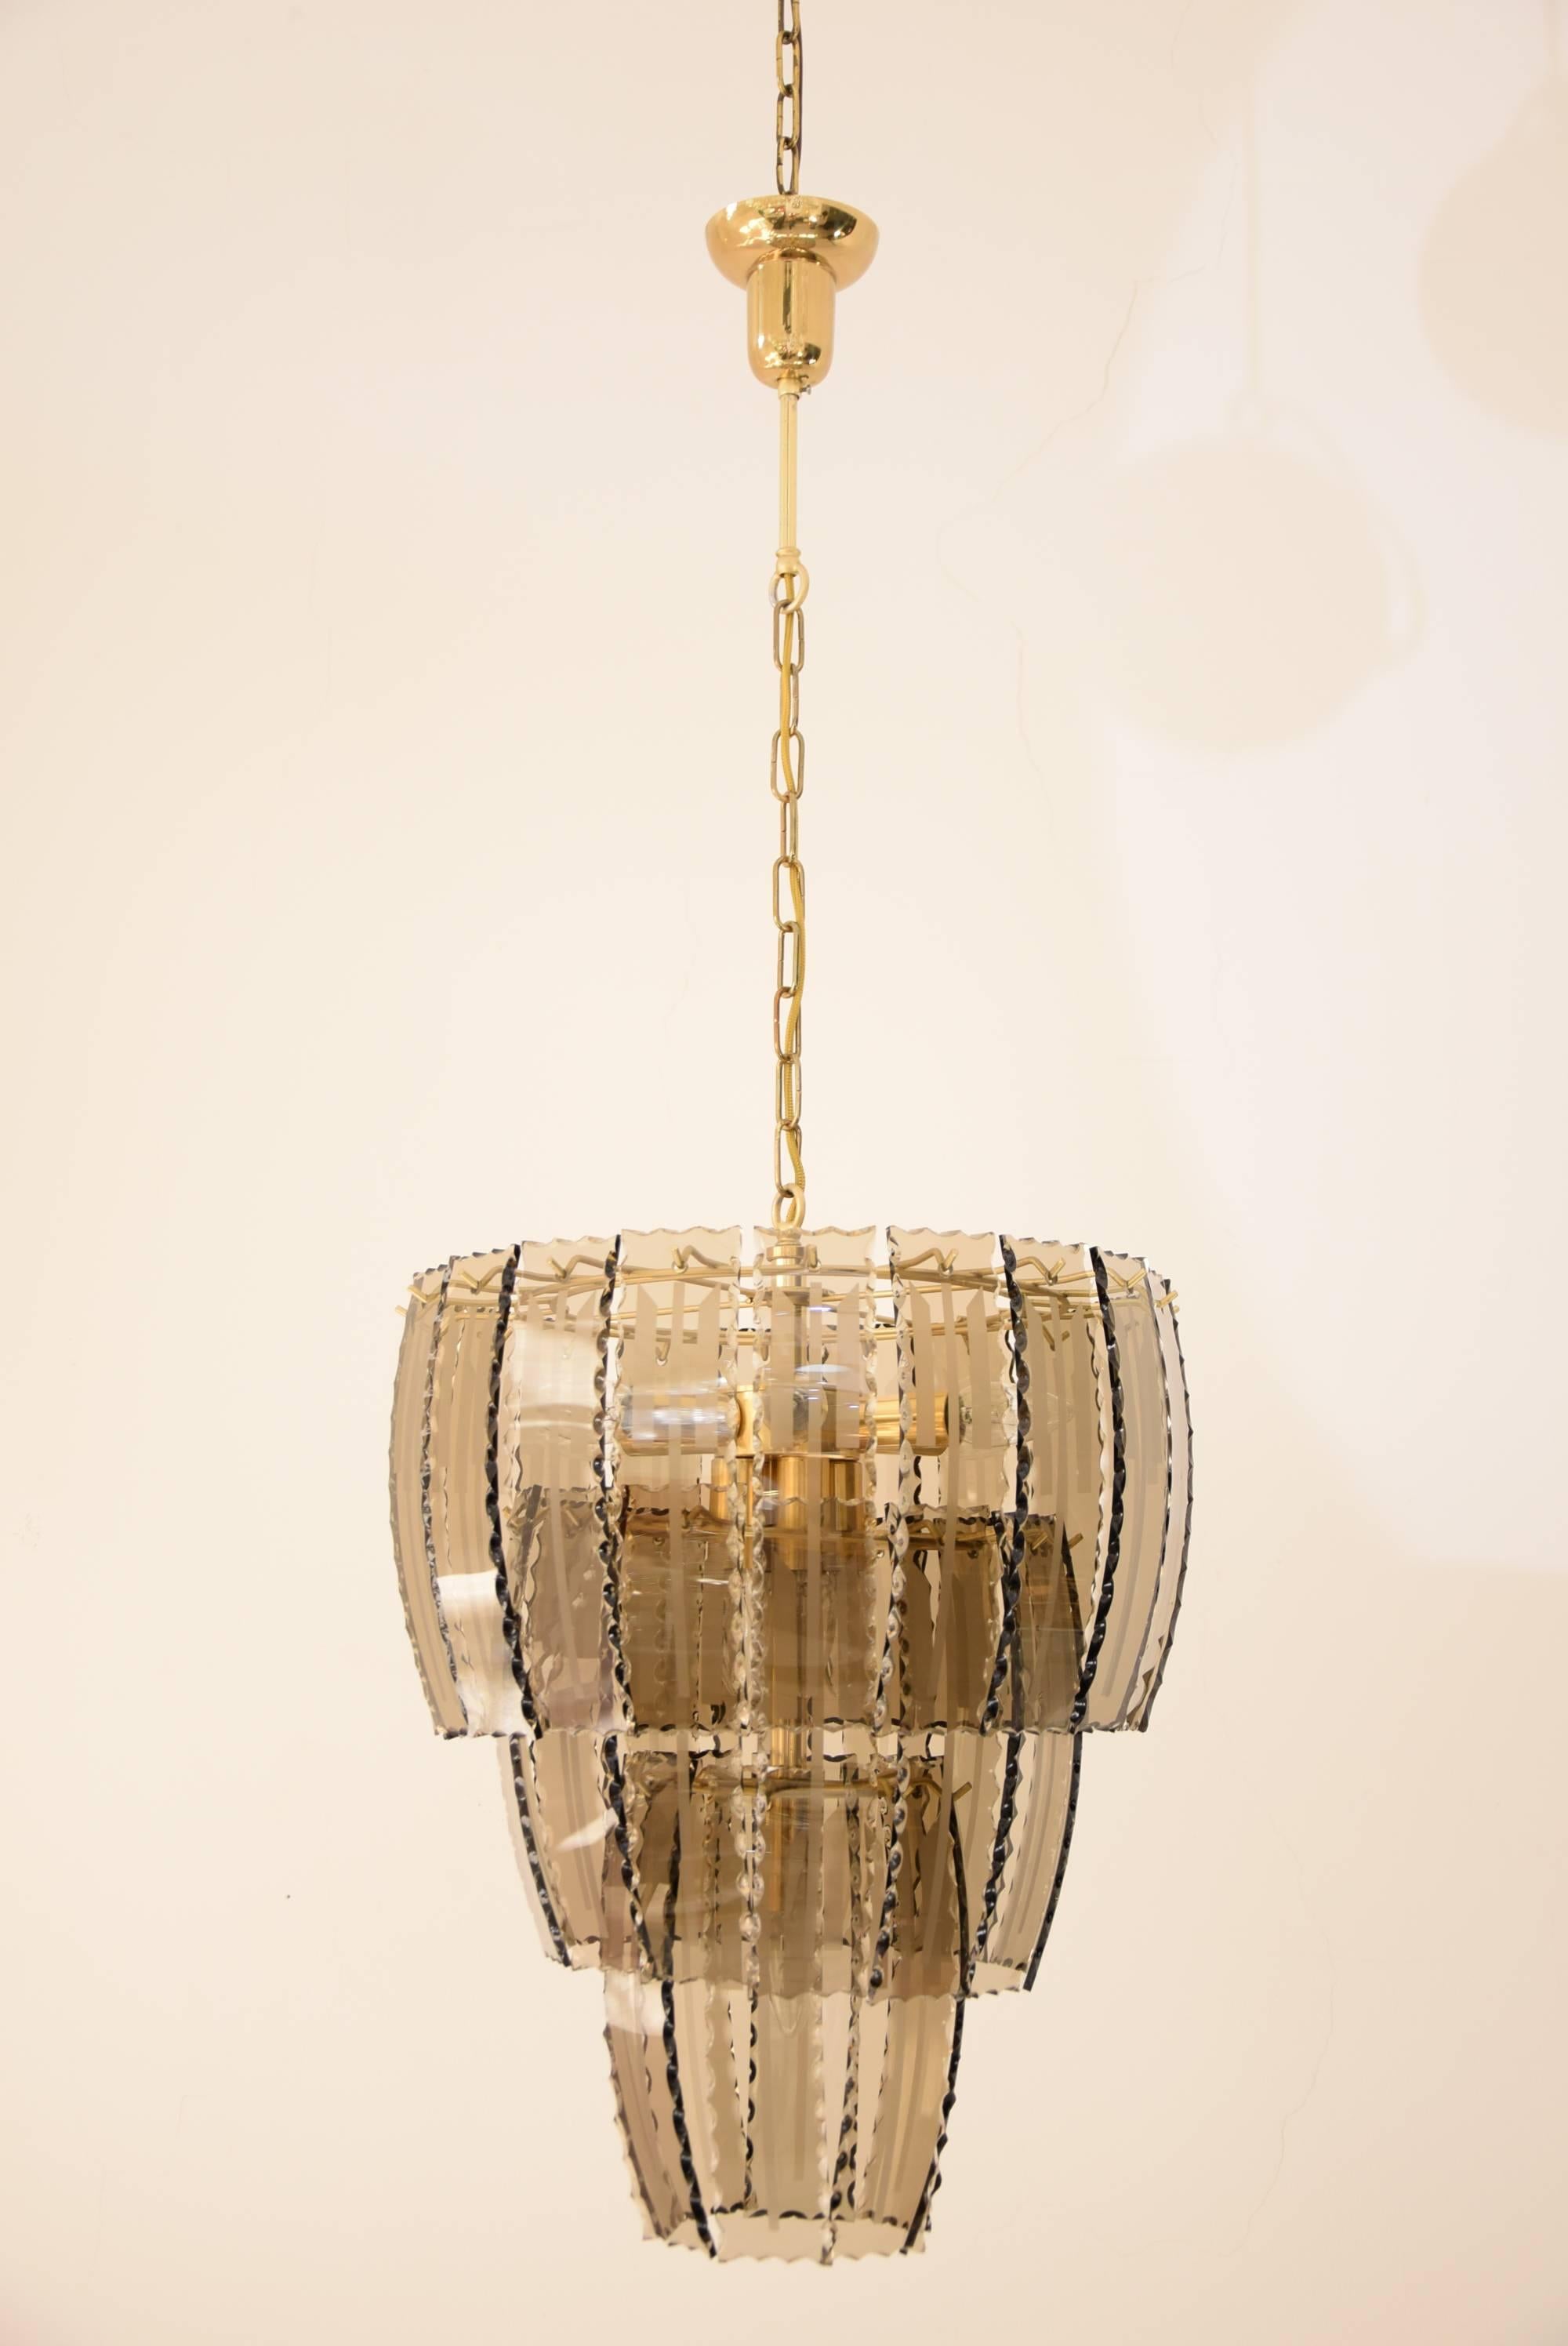 Beautiful big smoked glass serrated chandelier.
Midcentury eight-light chandelier features three tiers of curved, serrated smoked glass panels.
11 bulbs.
The high is adjustable for different rooms.